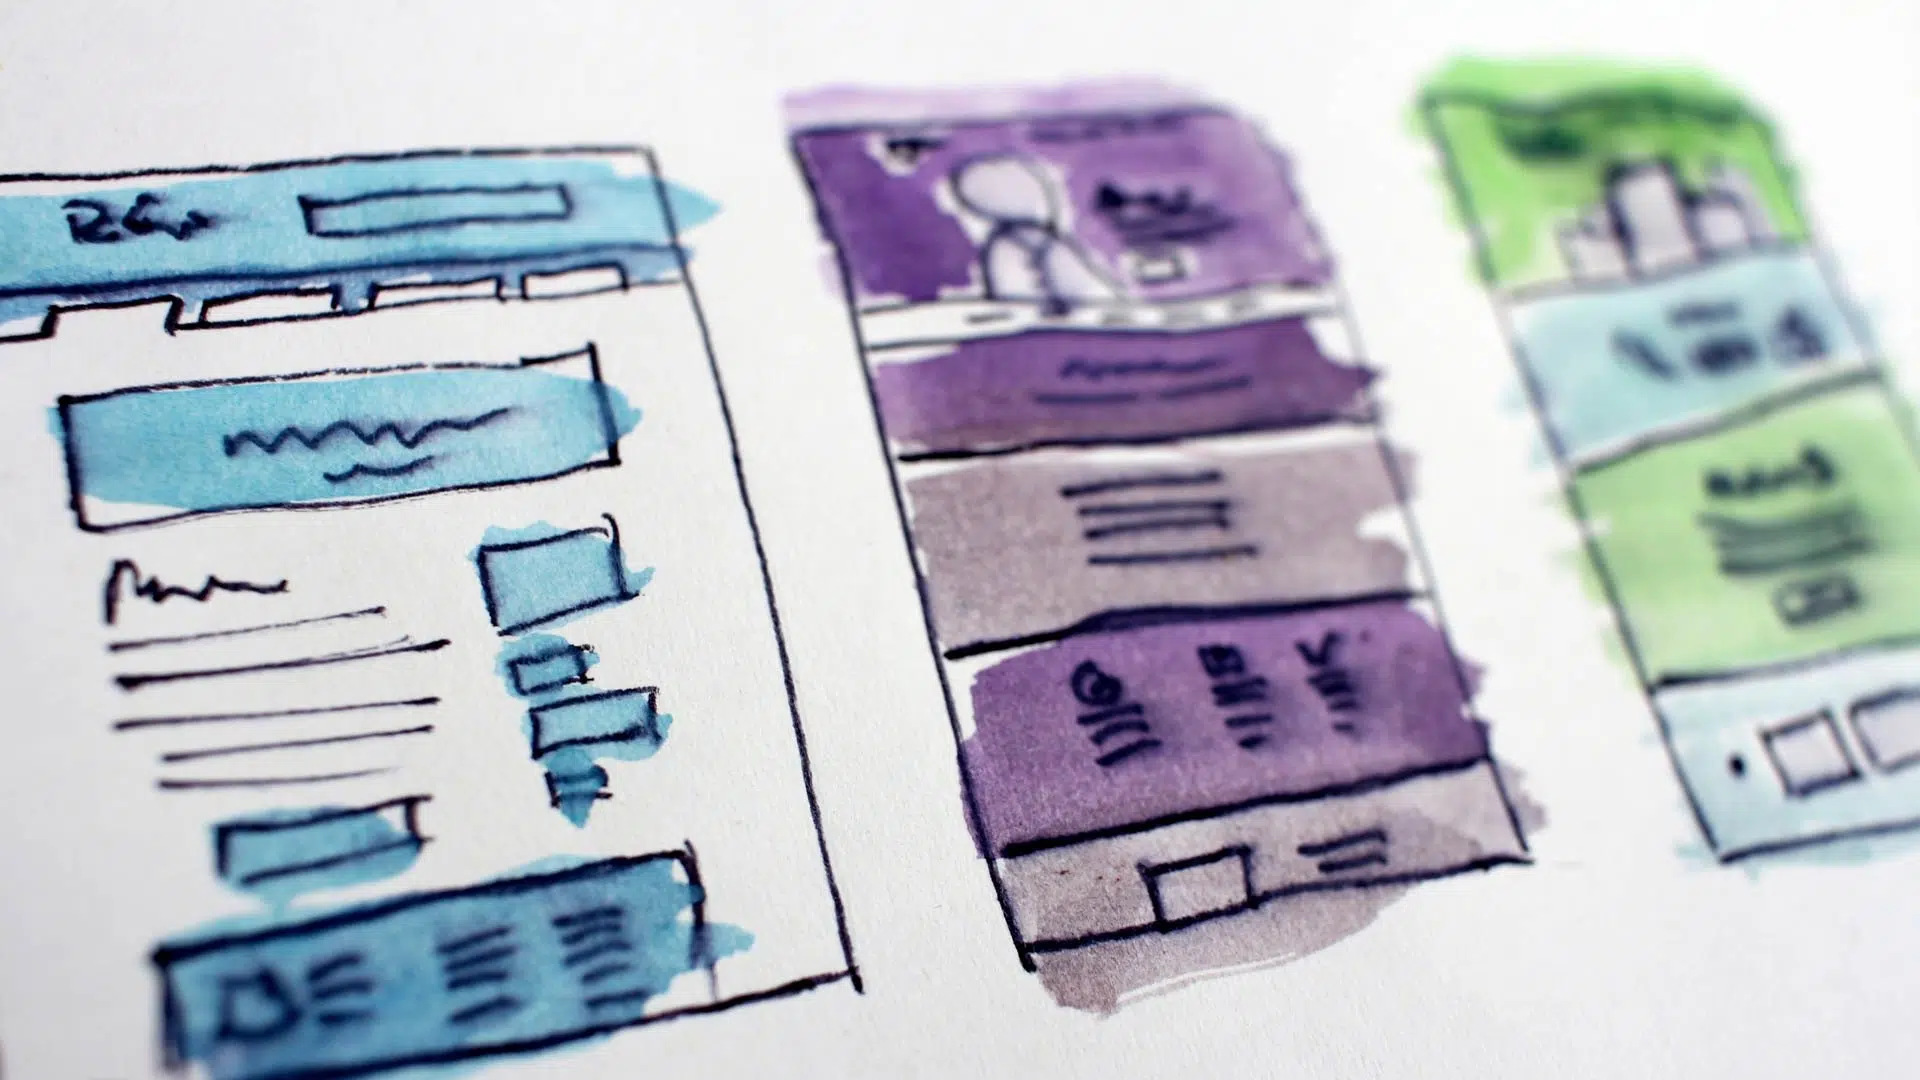 Considering a Website Redesign? Ask Yourself These 9 Questions First